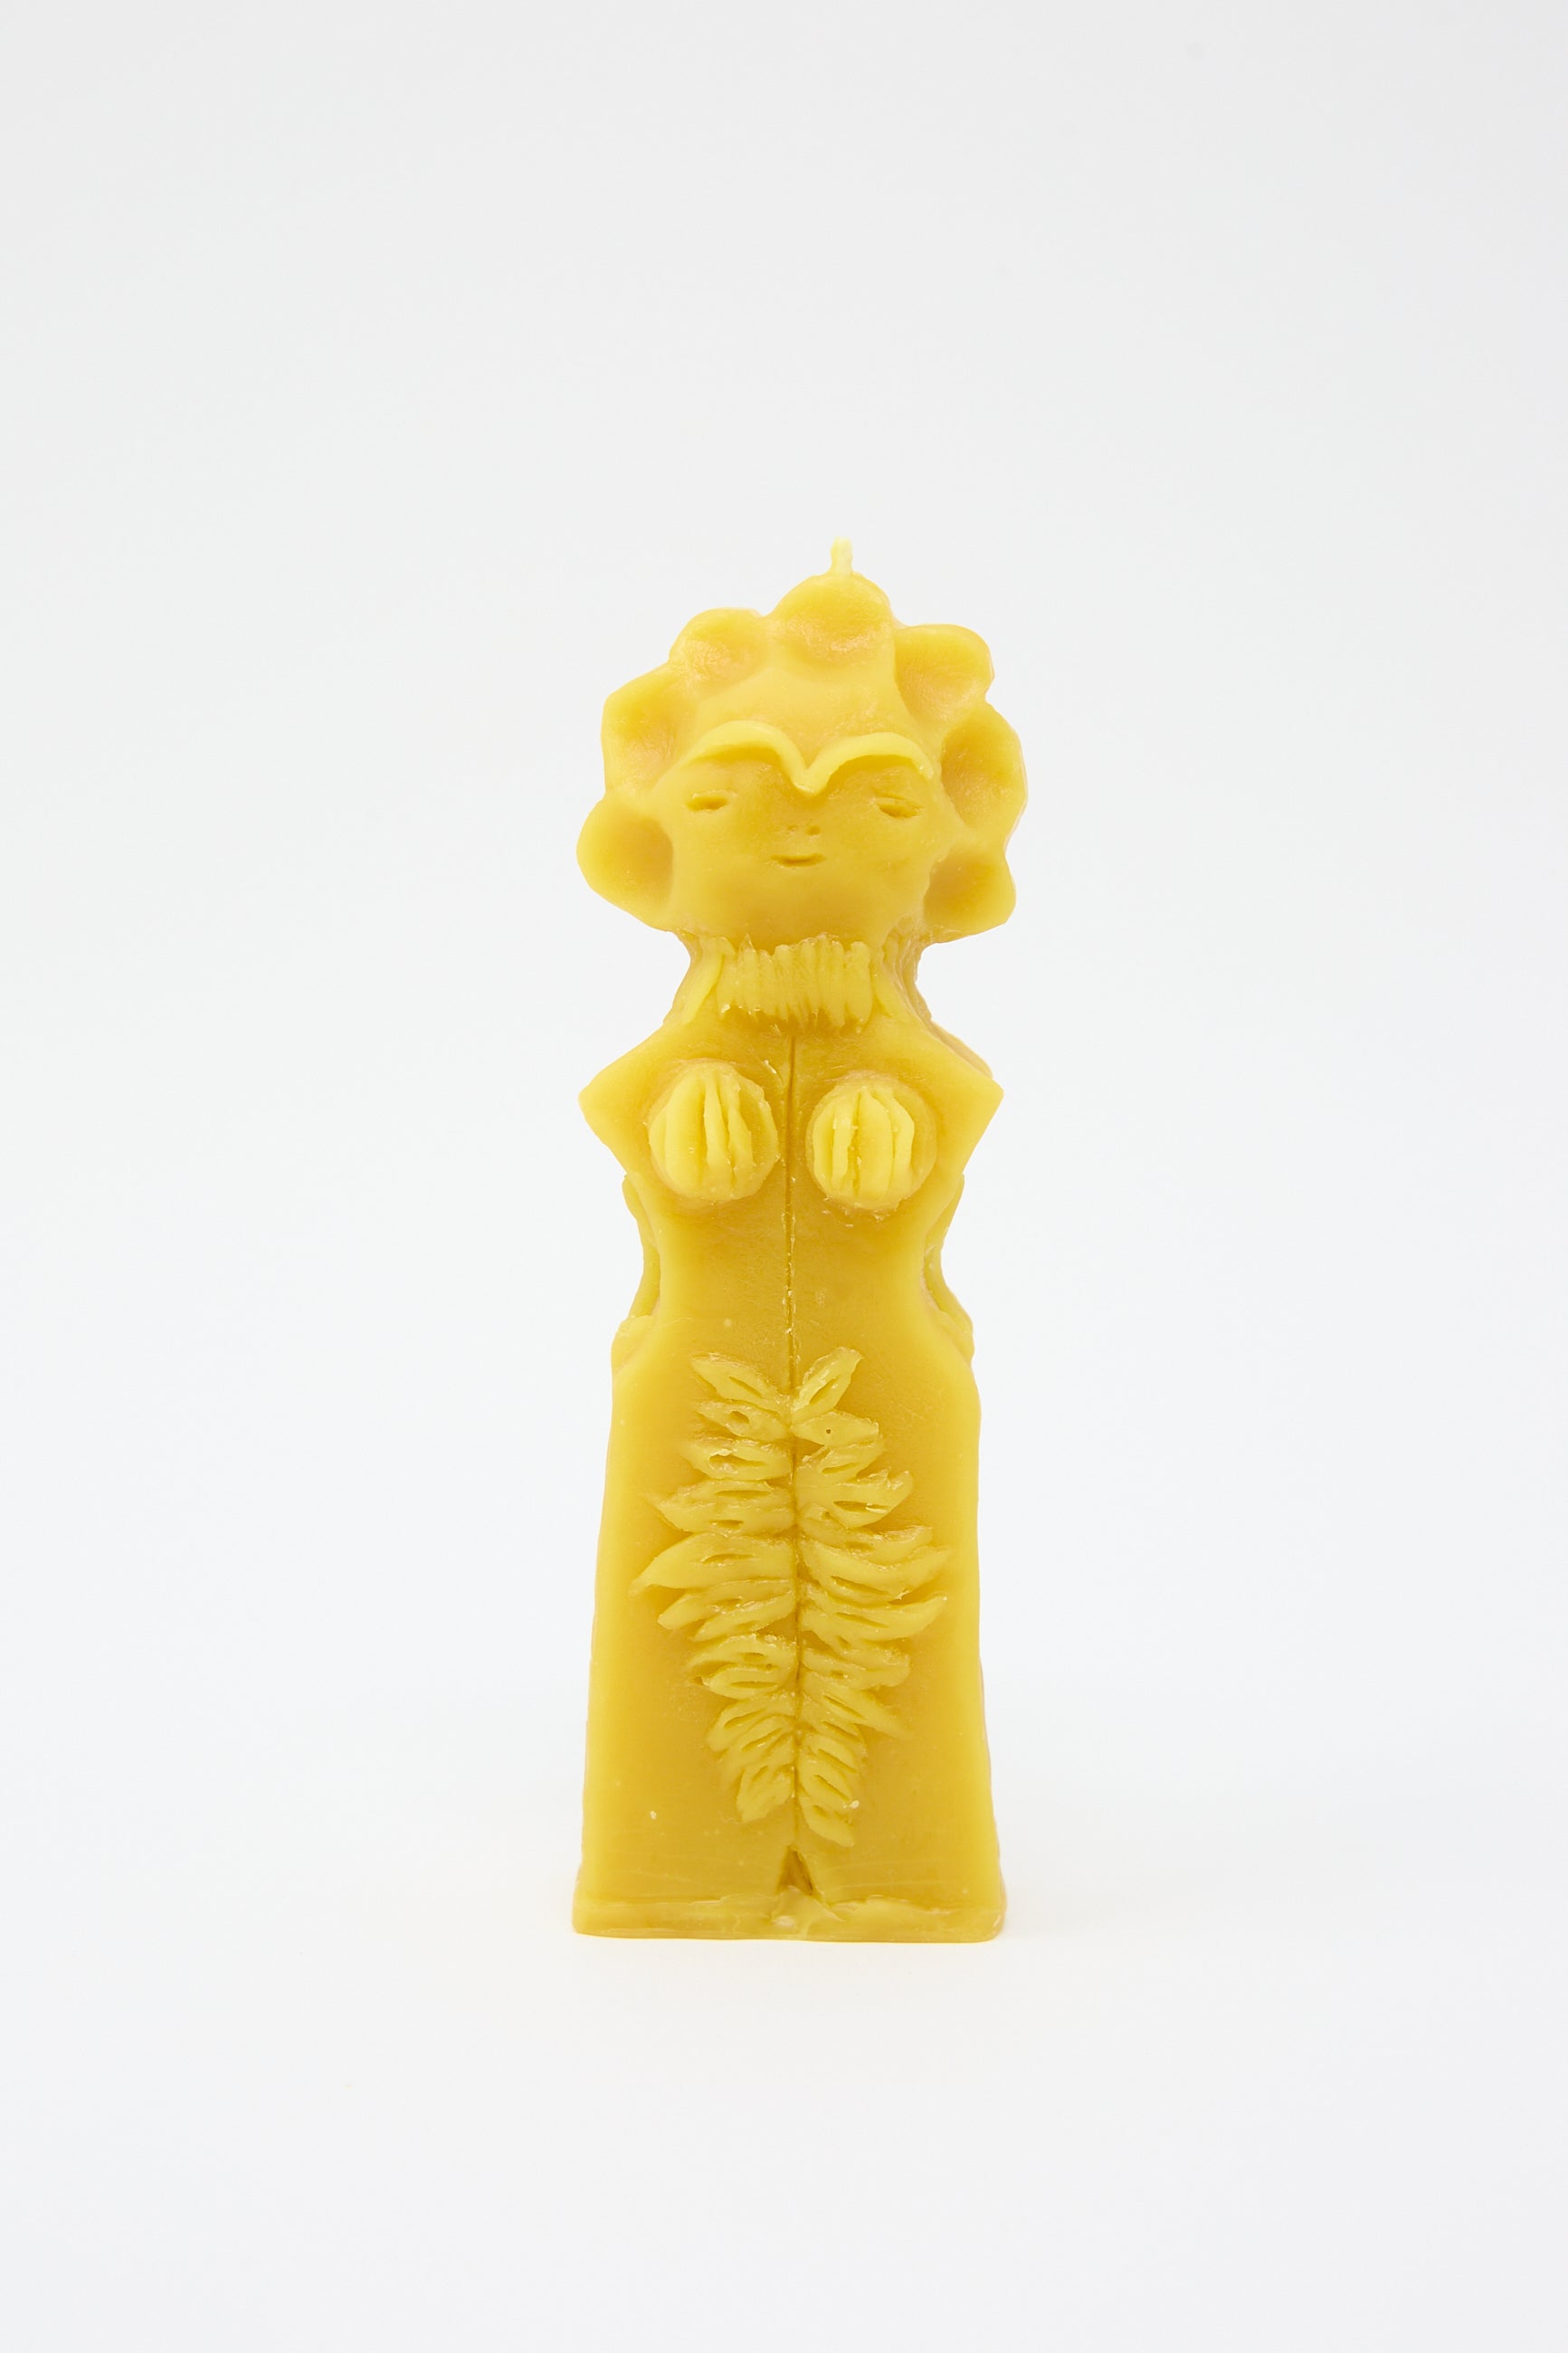 A Moon Goddess Candle by Rinn to Hitsuji, shaped like a figure with sun details and intricate patterns, hand formed on a white background.